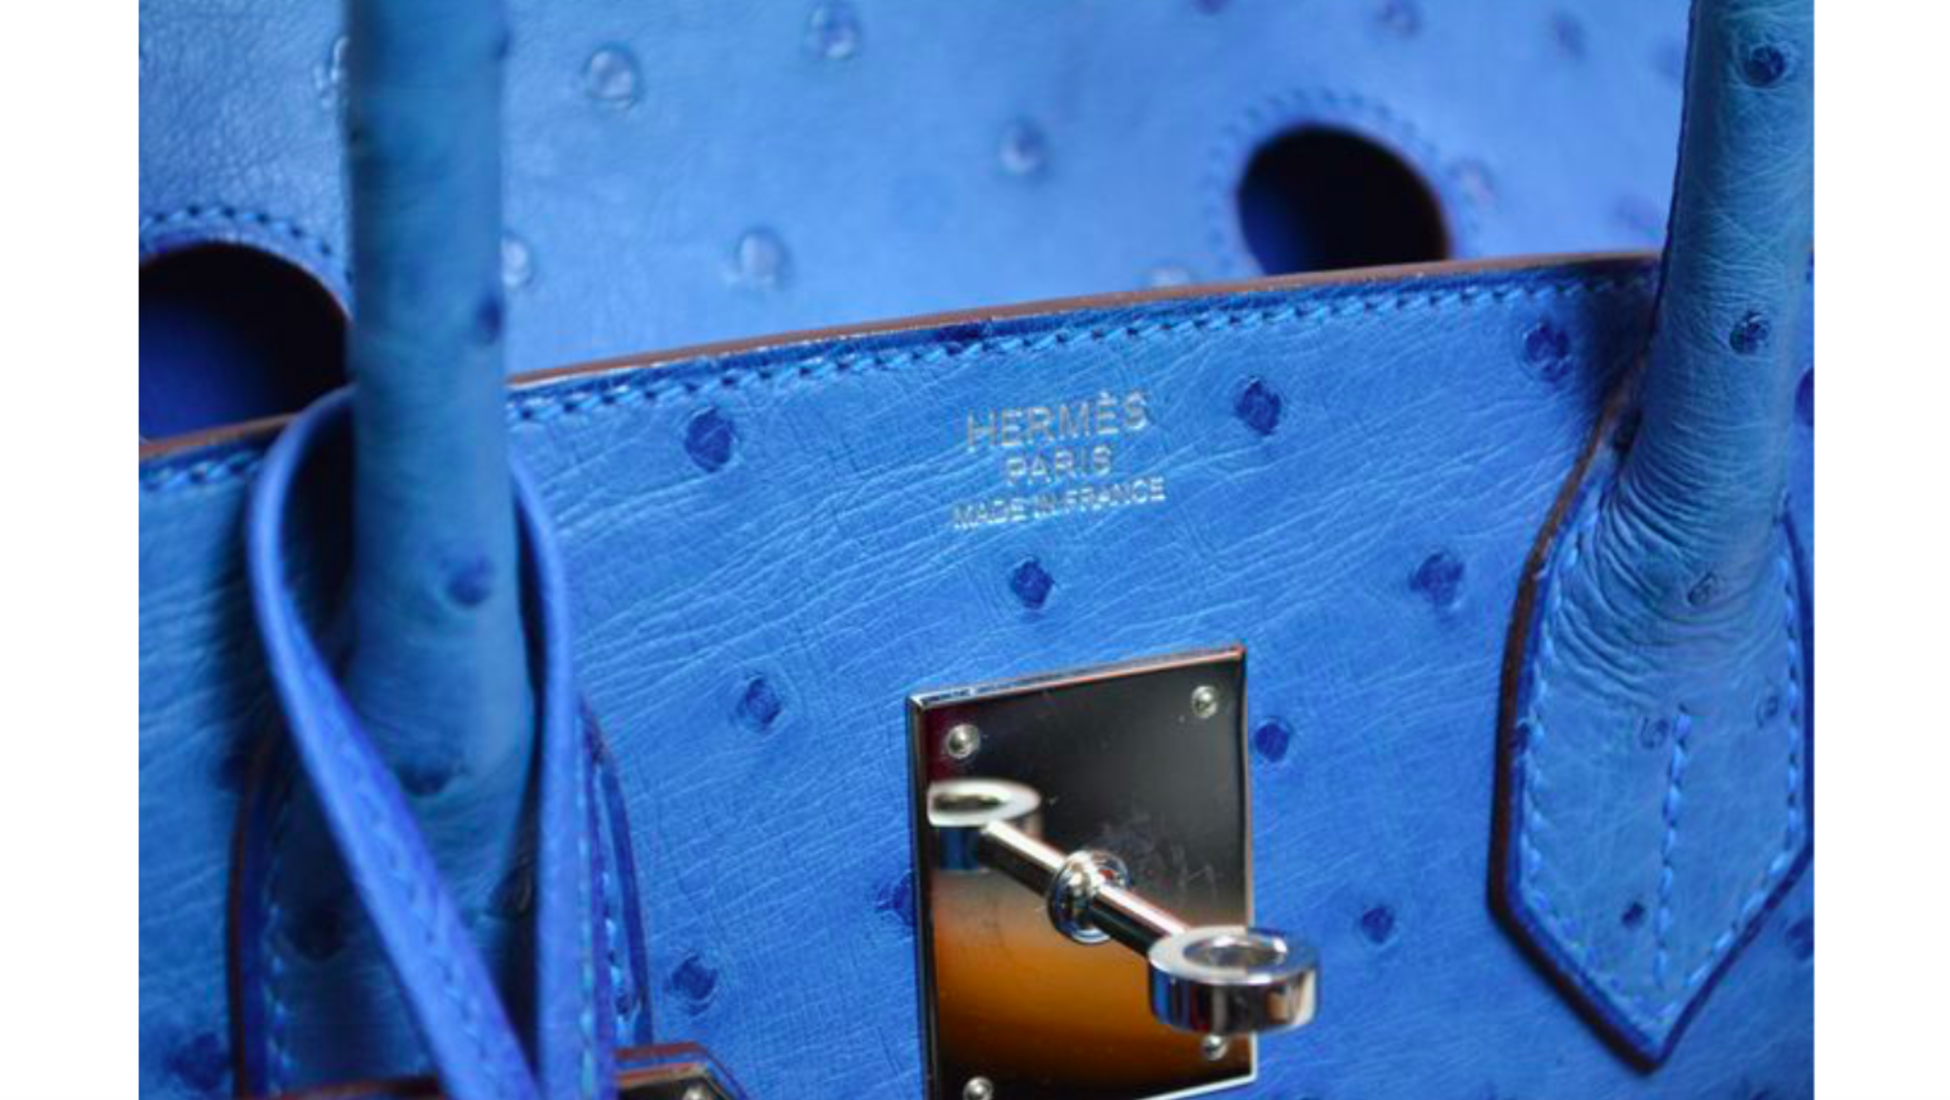 Five Facts about the Hermès Kelly Bag that may surprise you